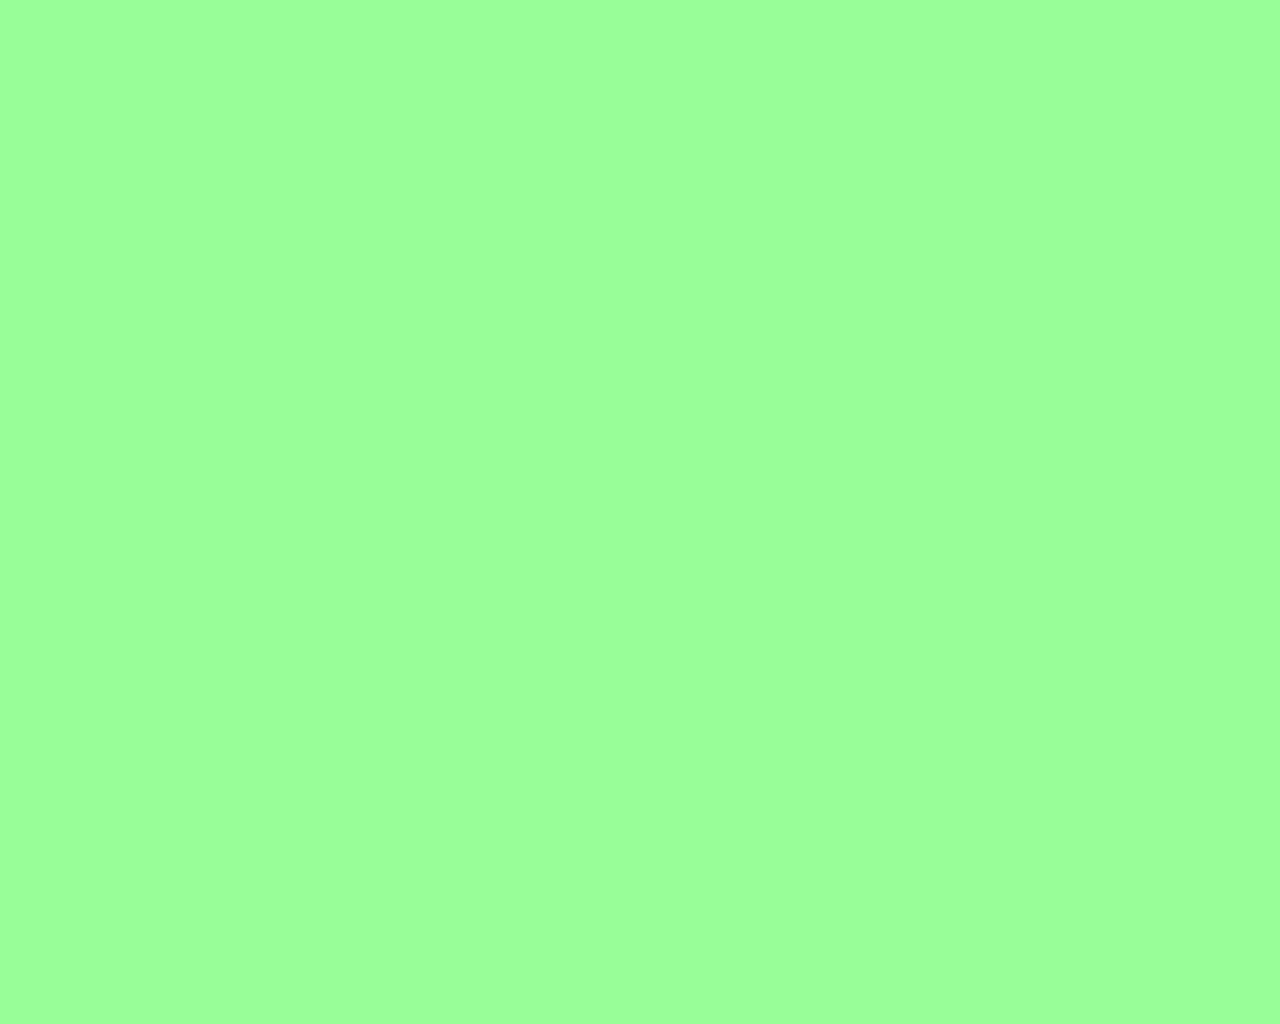 1280x1024 Mint Green Solid Color Background